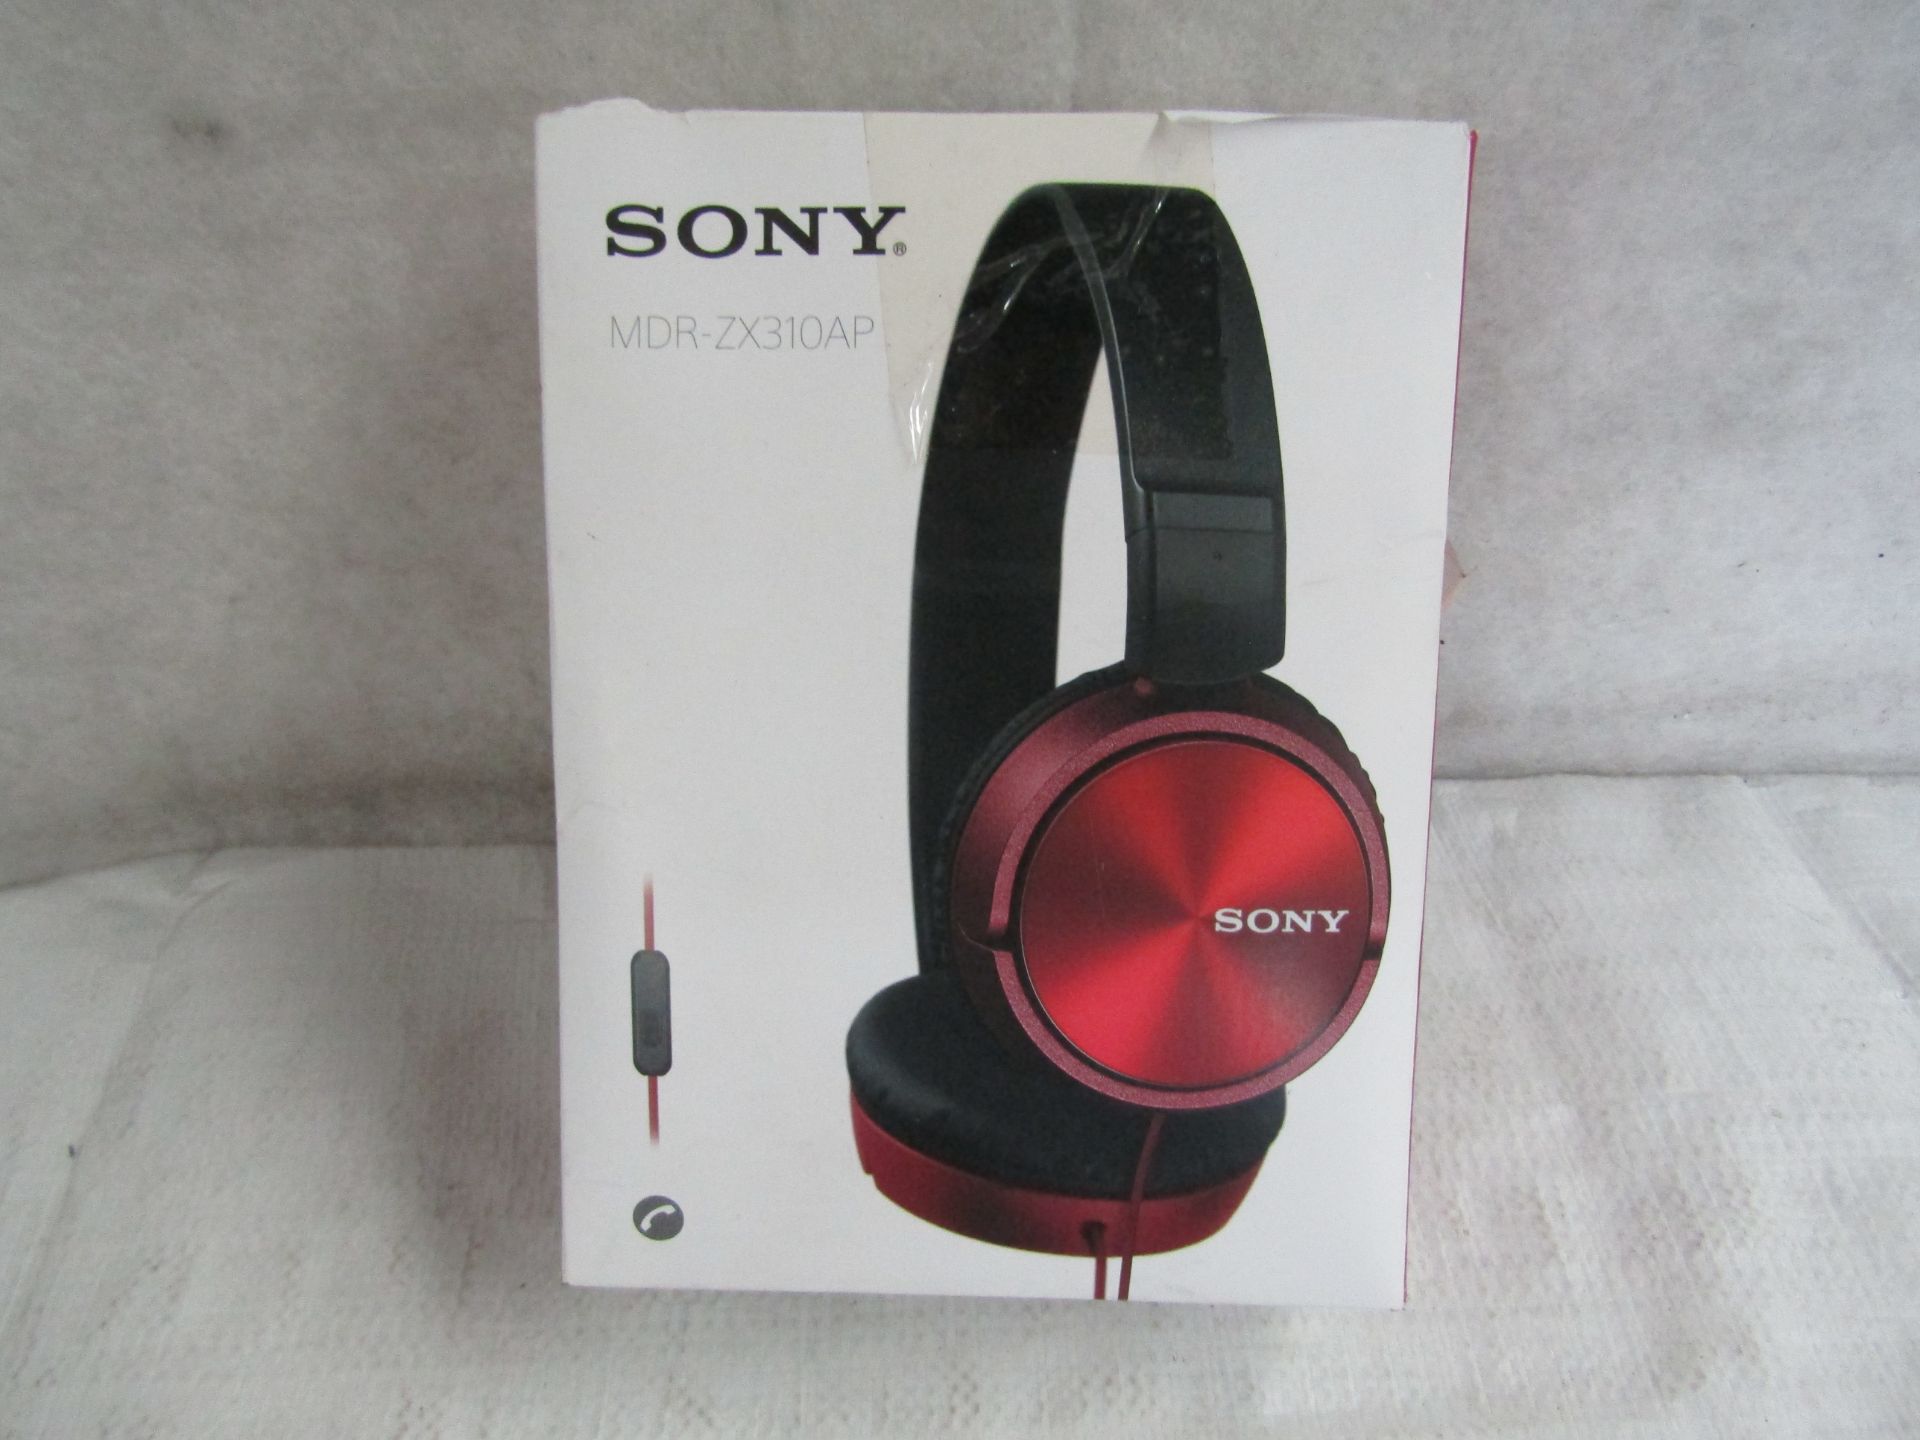 Sony Wired Overhead Headphones, MDR-ZX310AP - Unchecked & Box Slighty Damaged.